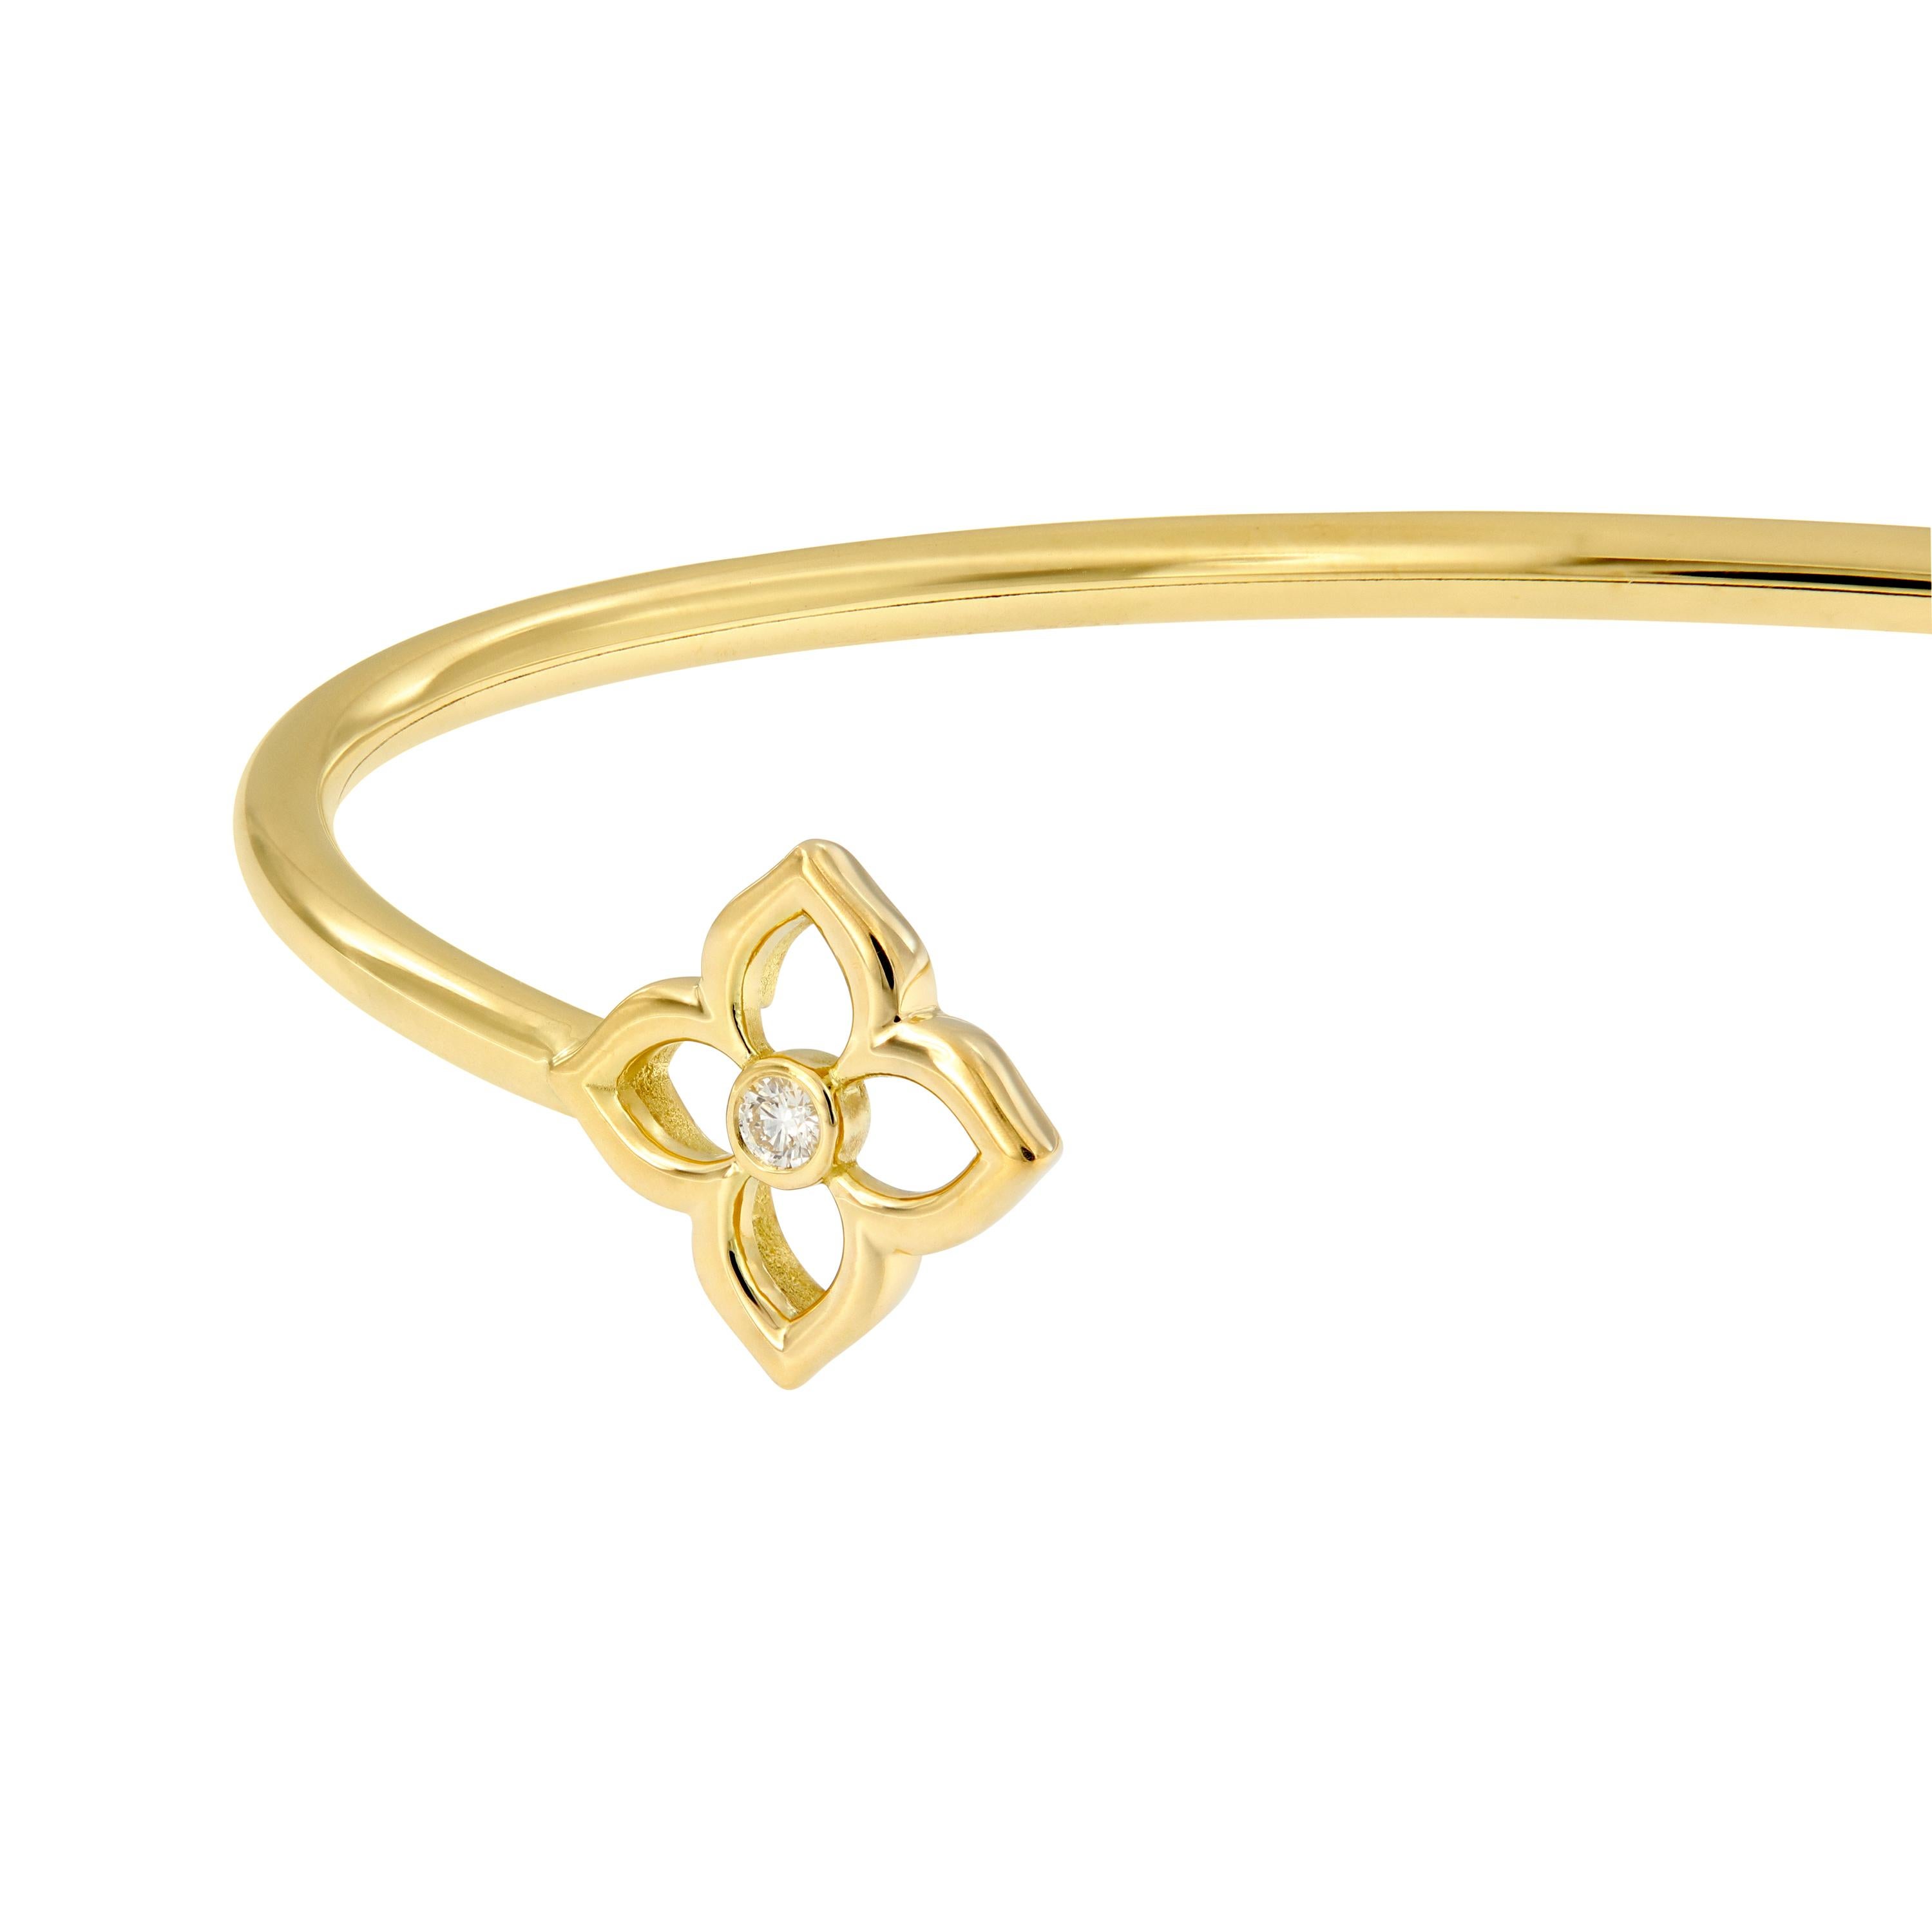 The mini lotus bracelet features two round diamonds bezel-set in high-polished 18k yellow gold. Bracelet is from the G. Boutique Collection by Gumuchian. Weighs x grams. Lotus measures 10mm x 10mm. 

Diamonds 0.10 cttw